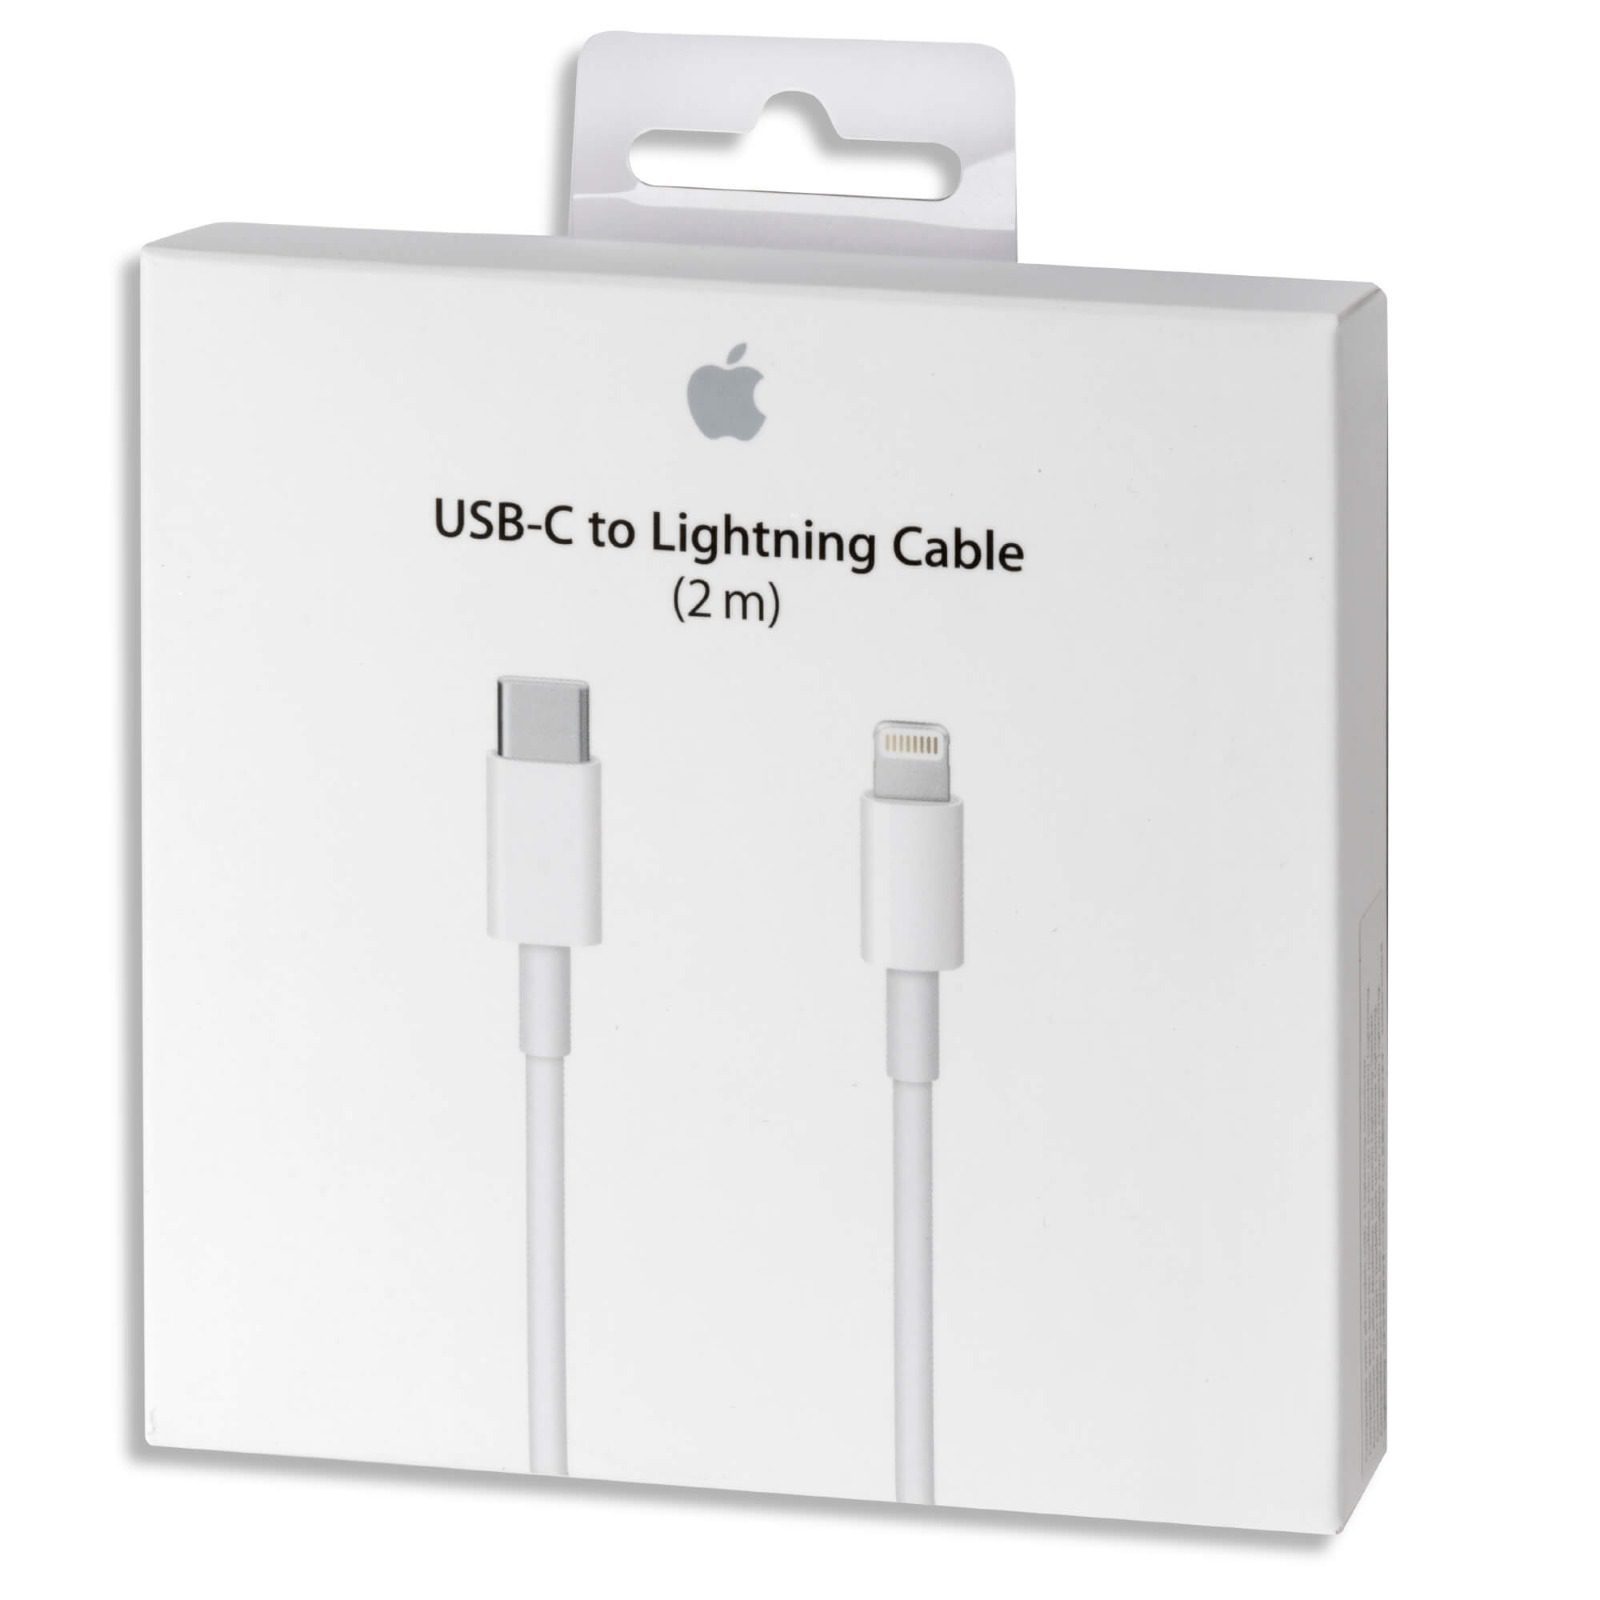 USB-C to Lightning Cable (2 m) - caygadgets